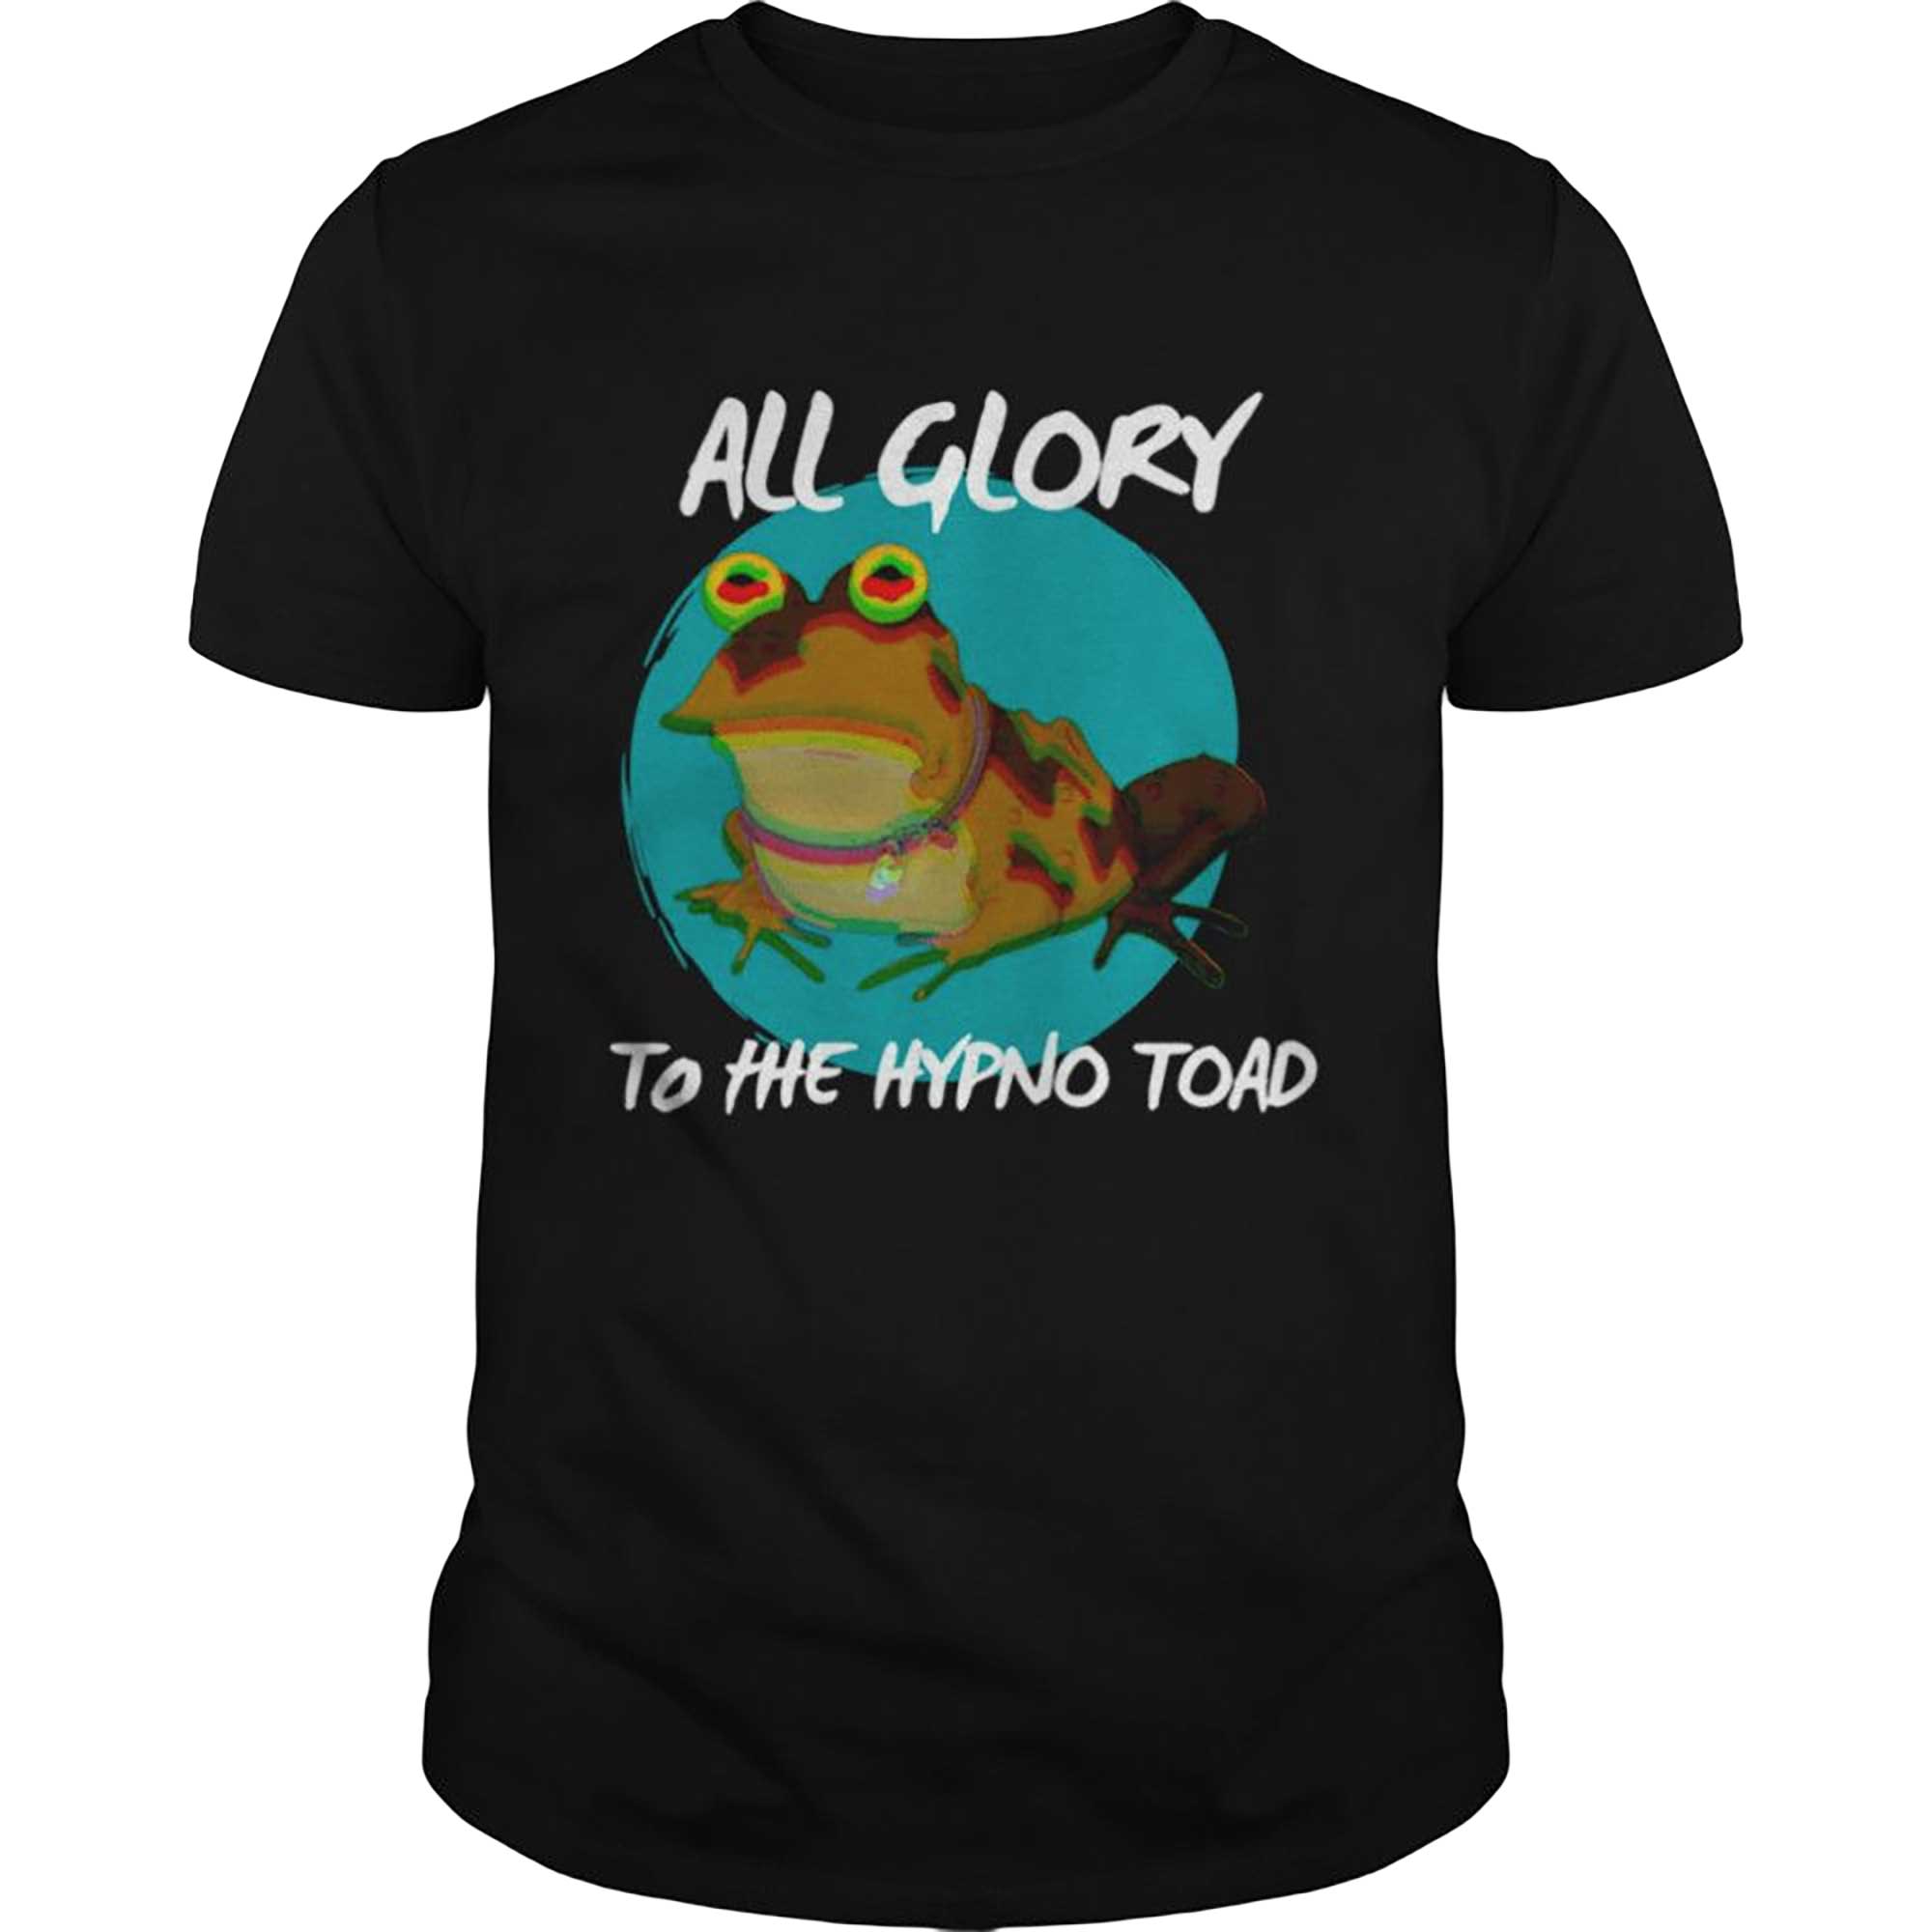 Skitongift-All-Glory-To-The-Hypno-Toad-Shirt-Funny-Shirts-Hoodie-Sweater-Short-Sleeve-Casual-Shirt